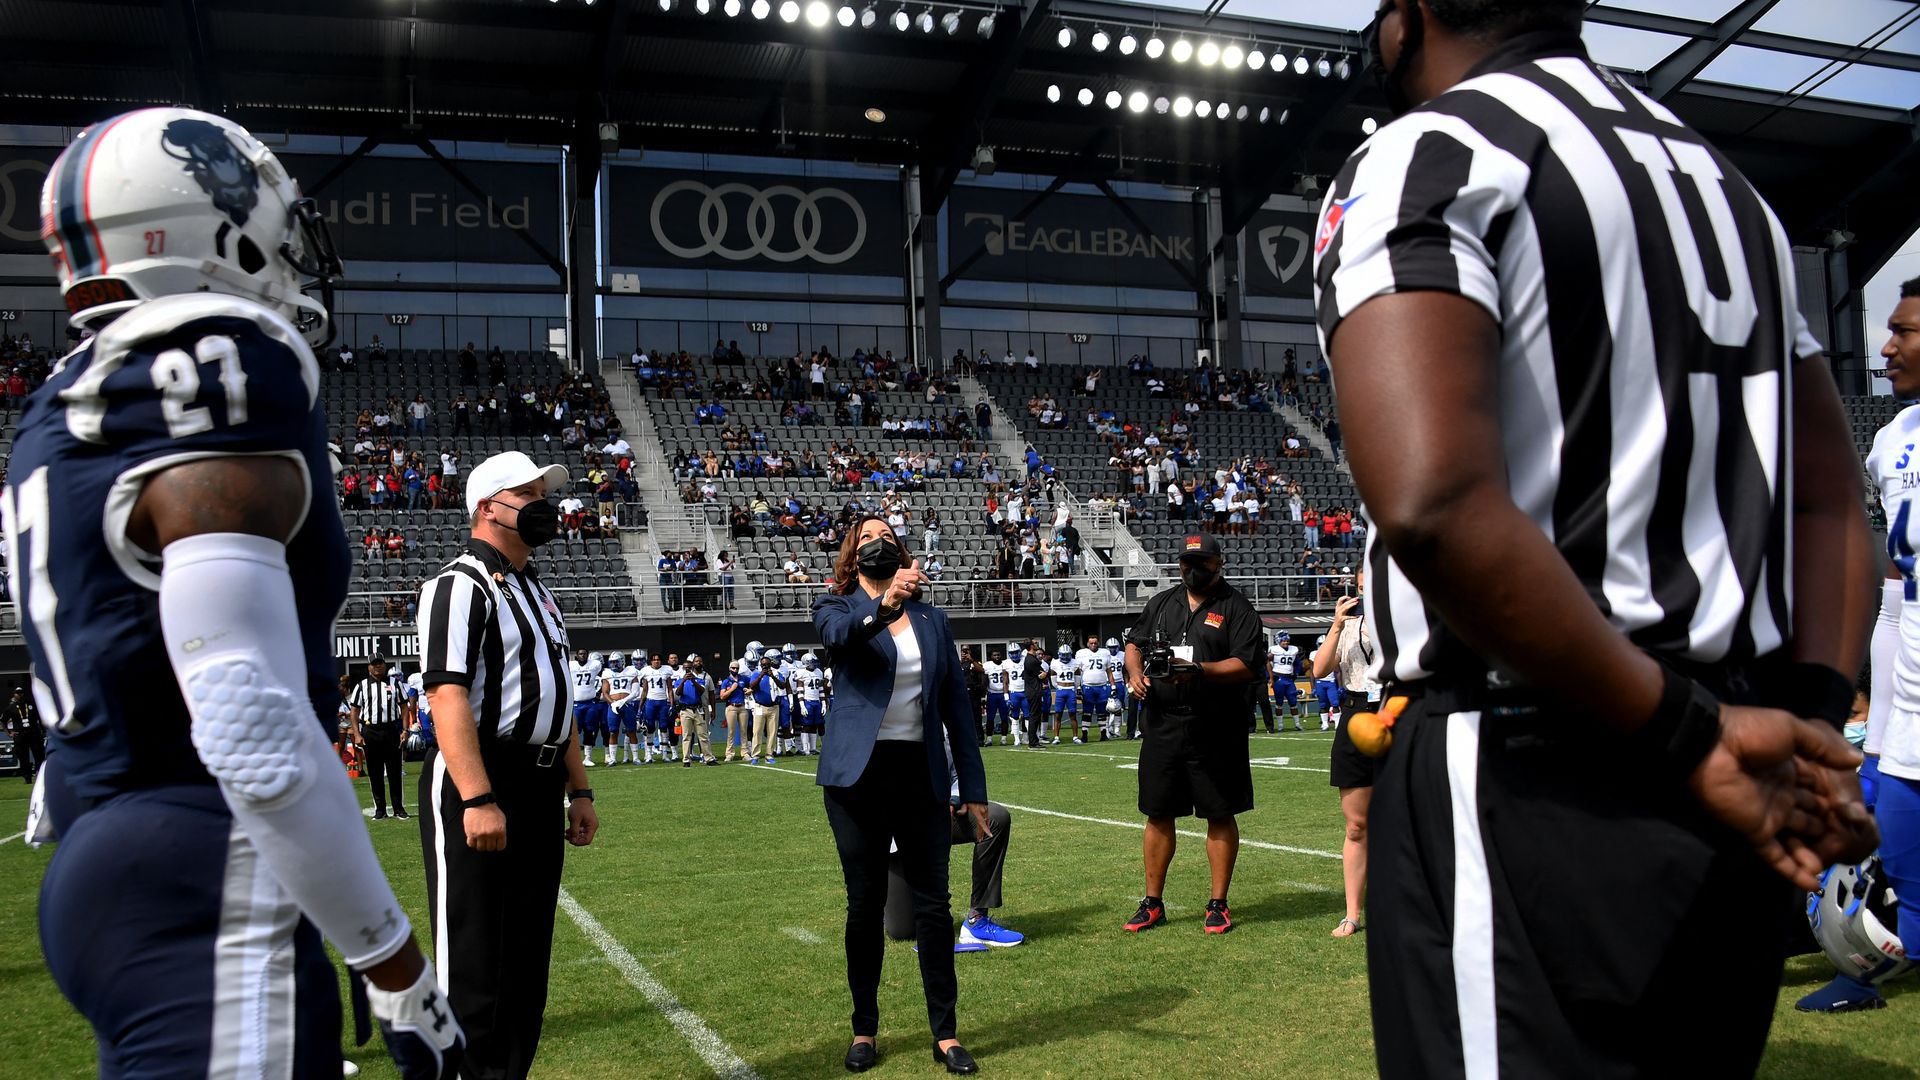 Vice President Kamala Harris tosses the coin for the football game between Howard University and Hampton University at Audi Field in Washington, DC, on September 18, 2021.